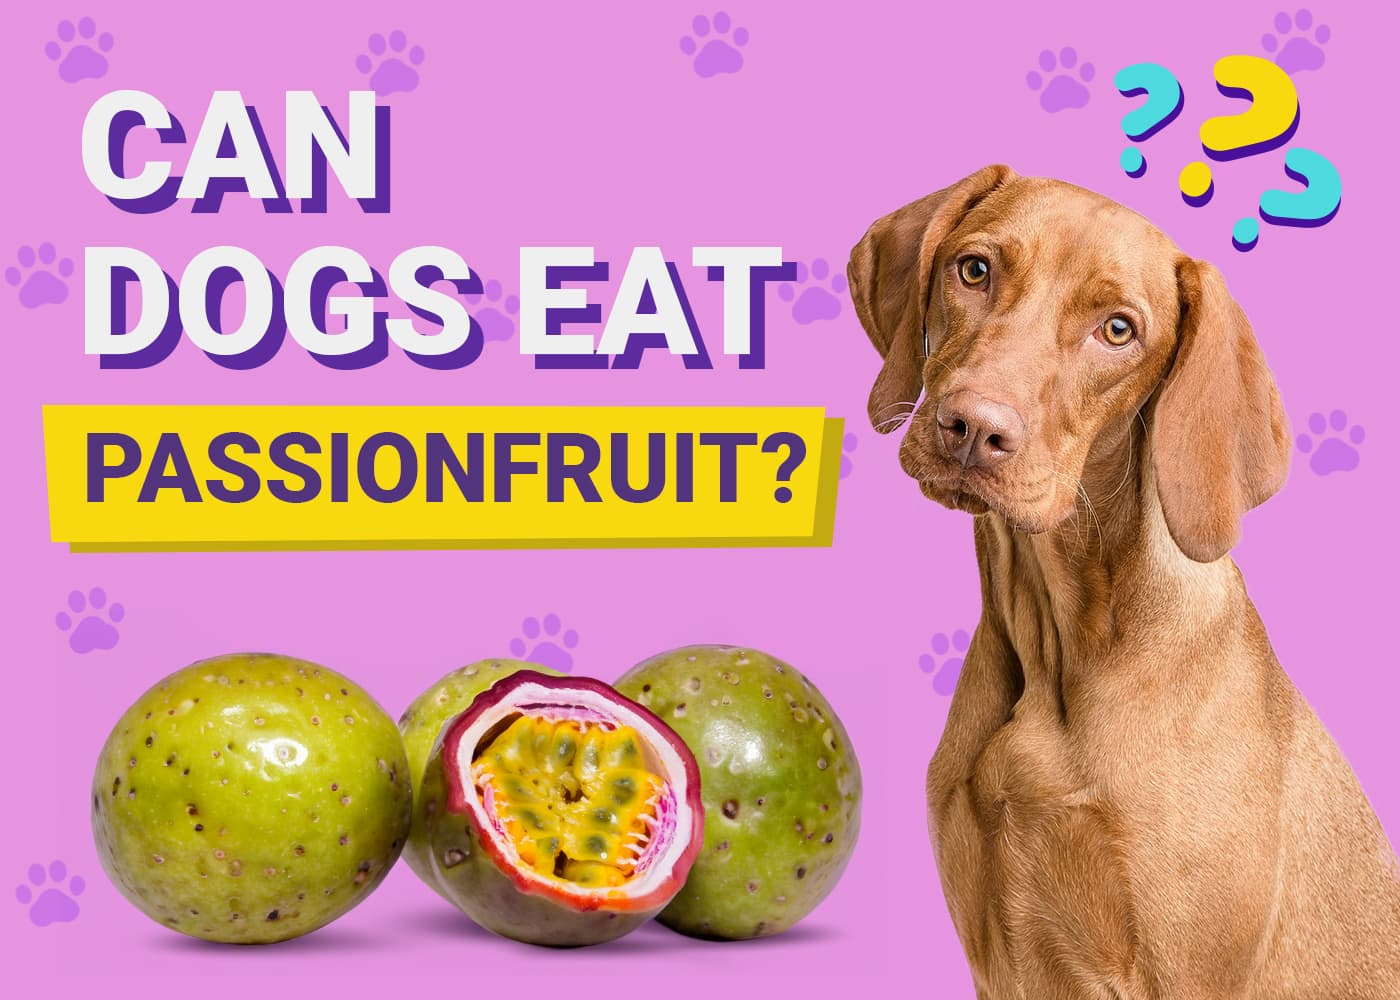 Can Dogs Eat Passionfruit